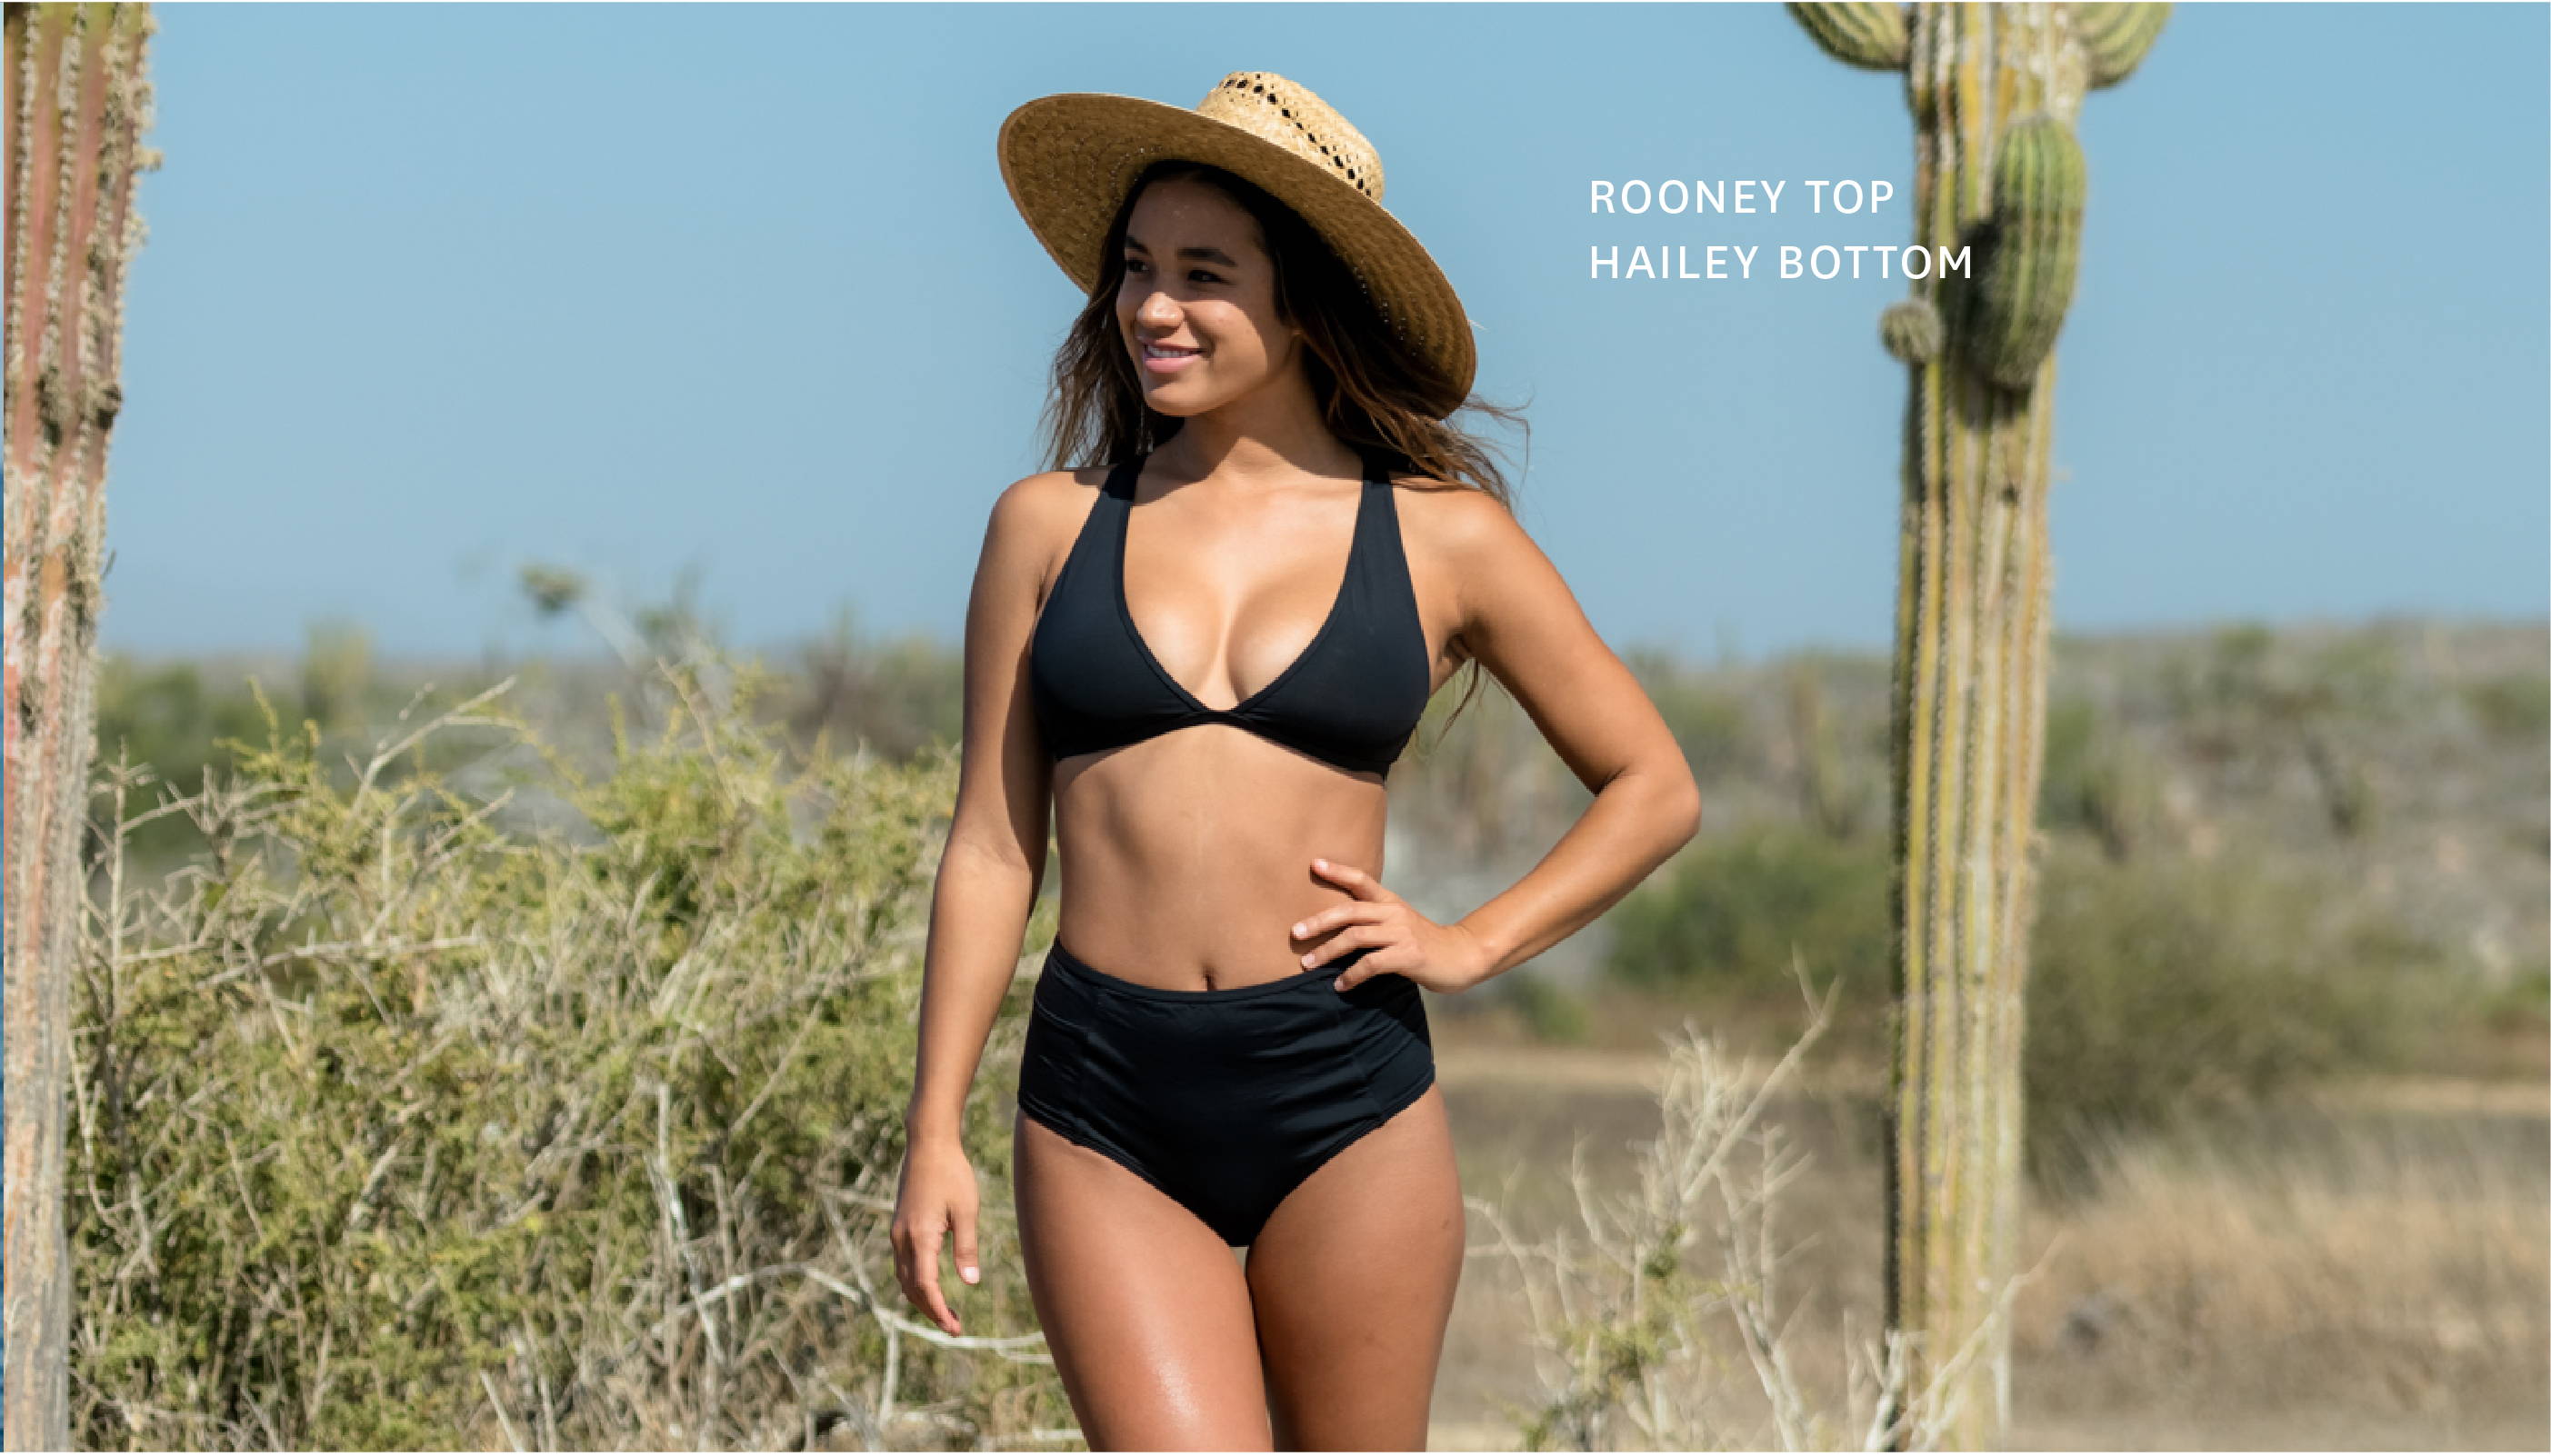 Get the ROONEY top in BLACK LICORICE!